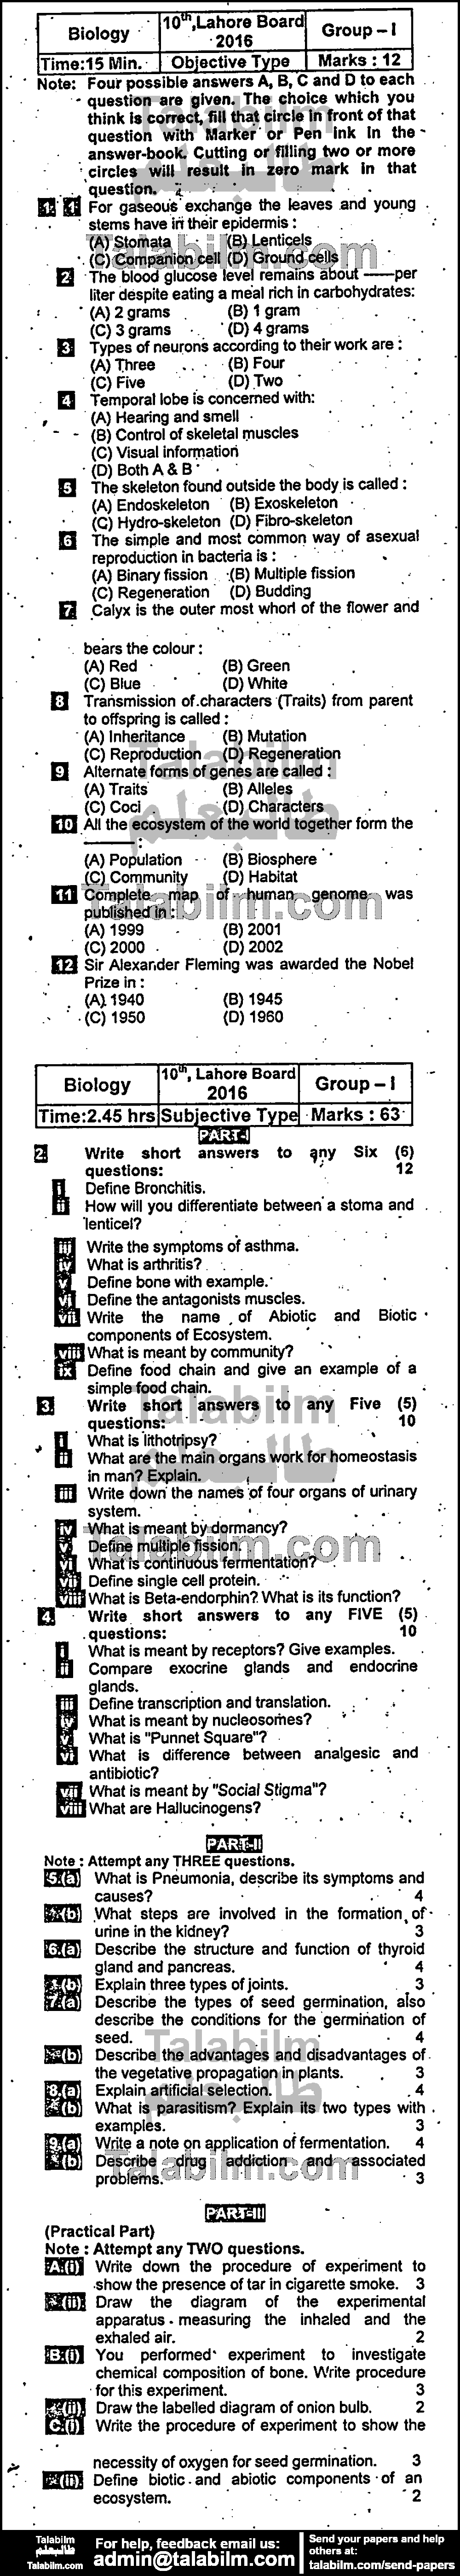 Biology 0 past paper for English Medium 2016 Group-I